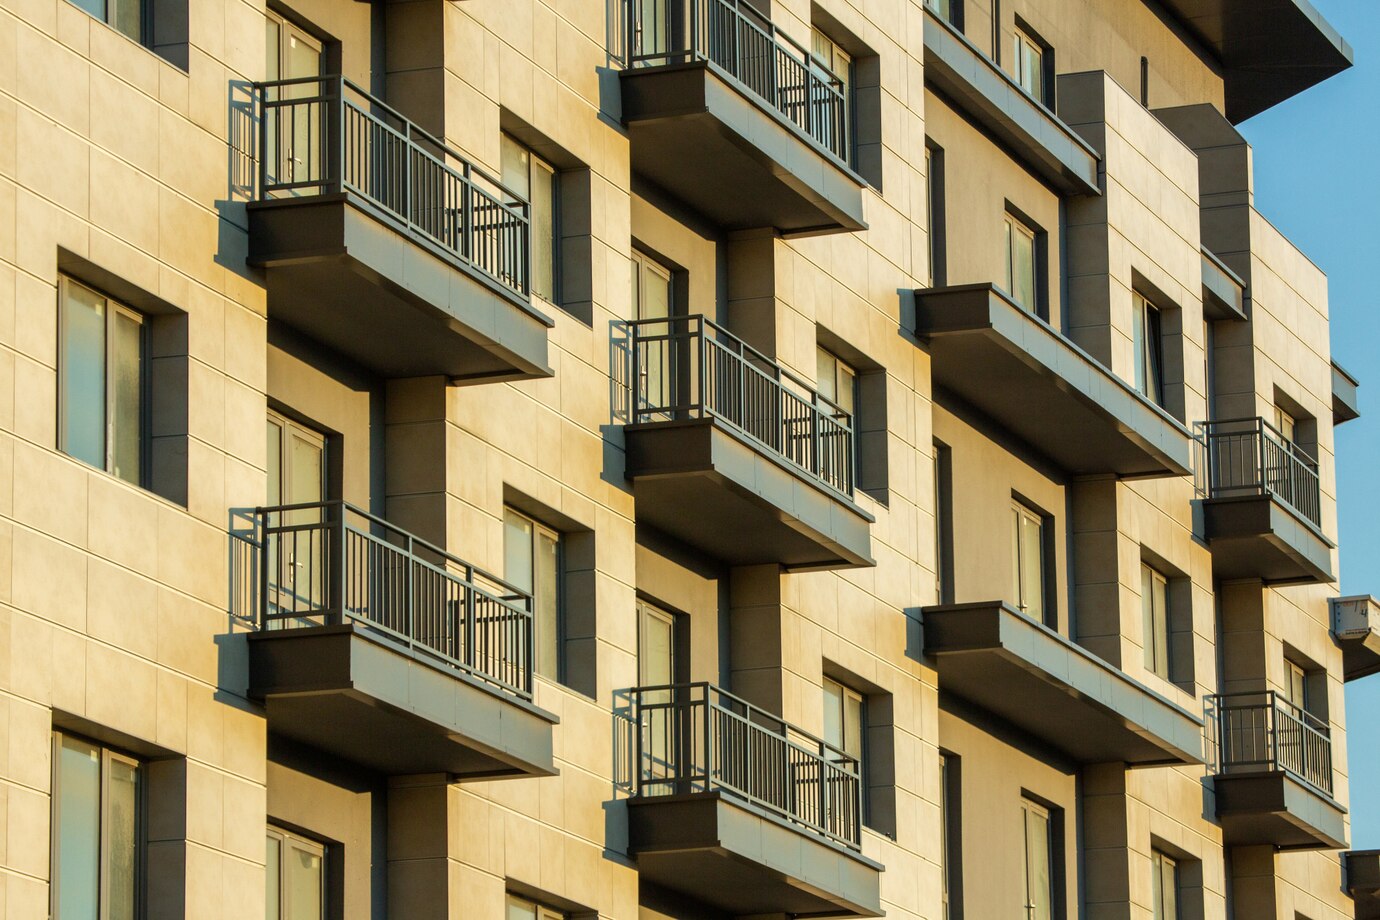 residential-building-with-windows-balconies_140725-7608